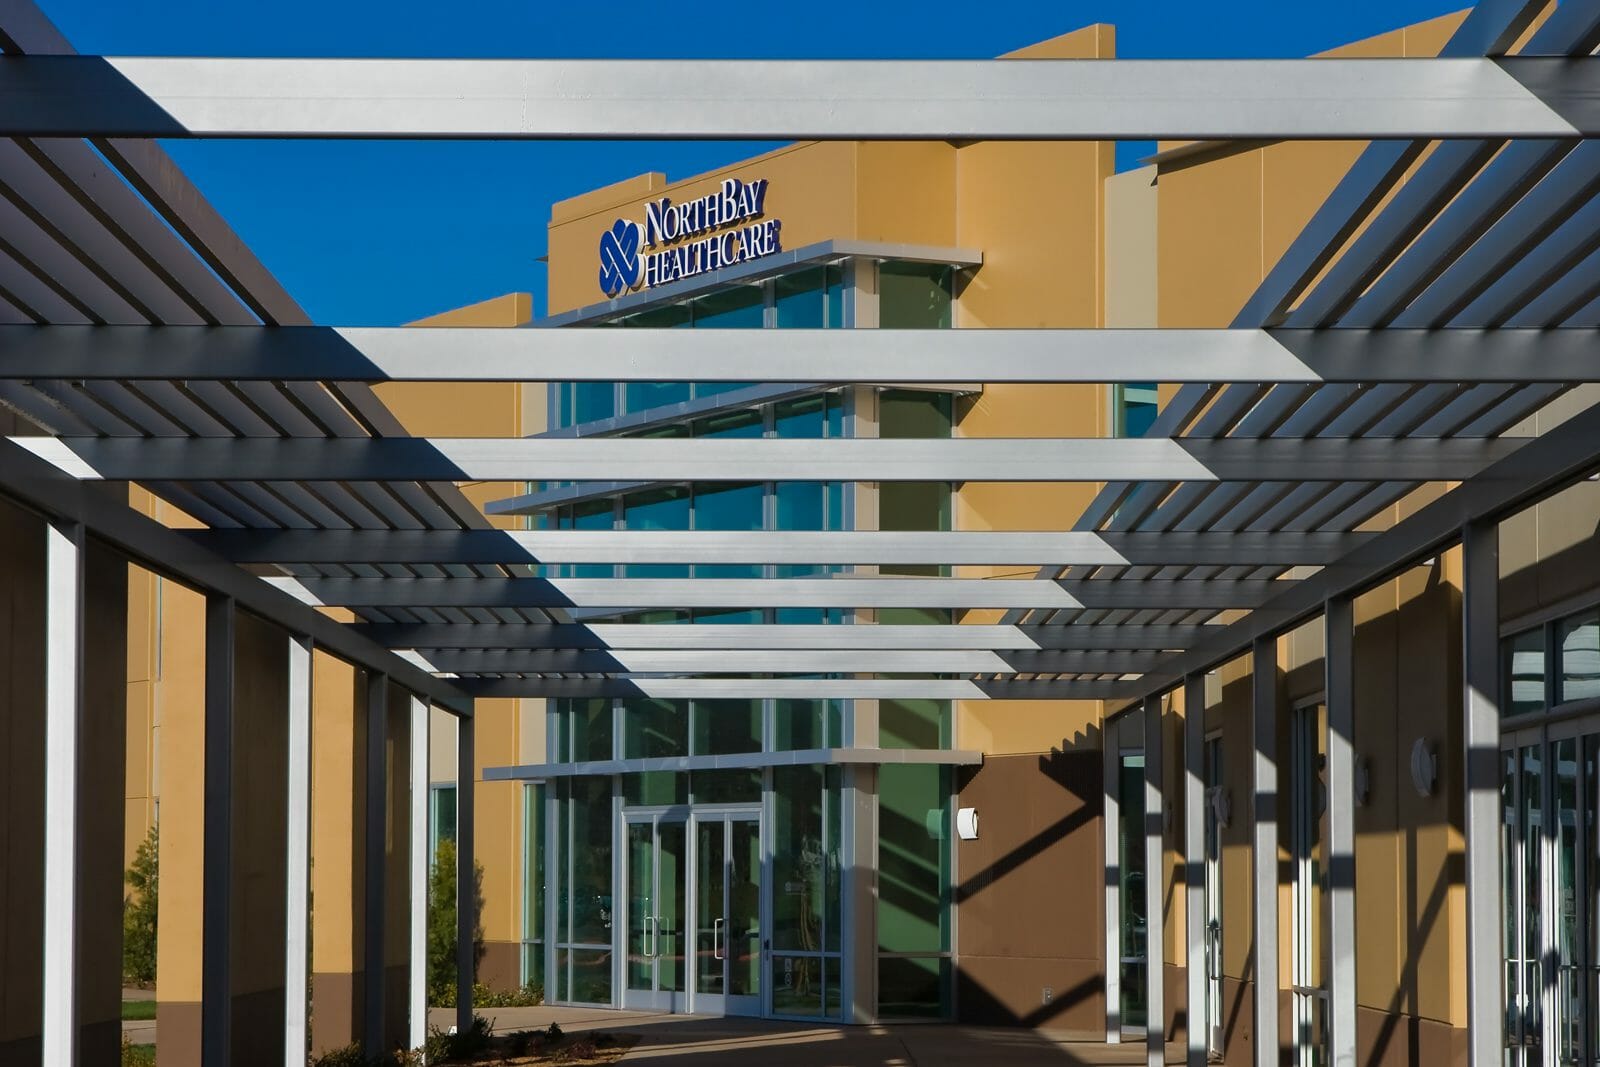 Exterior of NorthBay Healthcare with orange and brown exterior on the path to the front entrance under the pergola